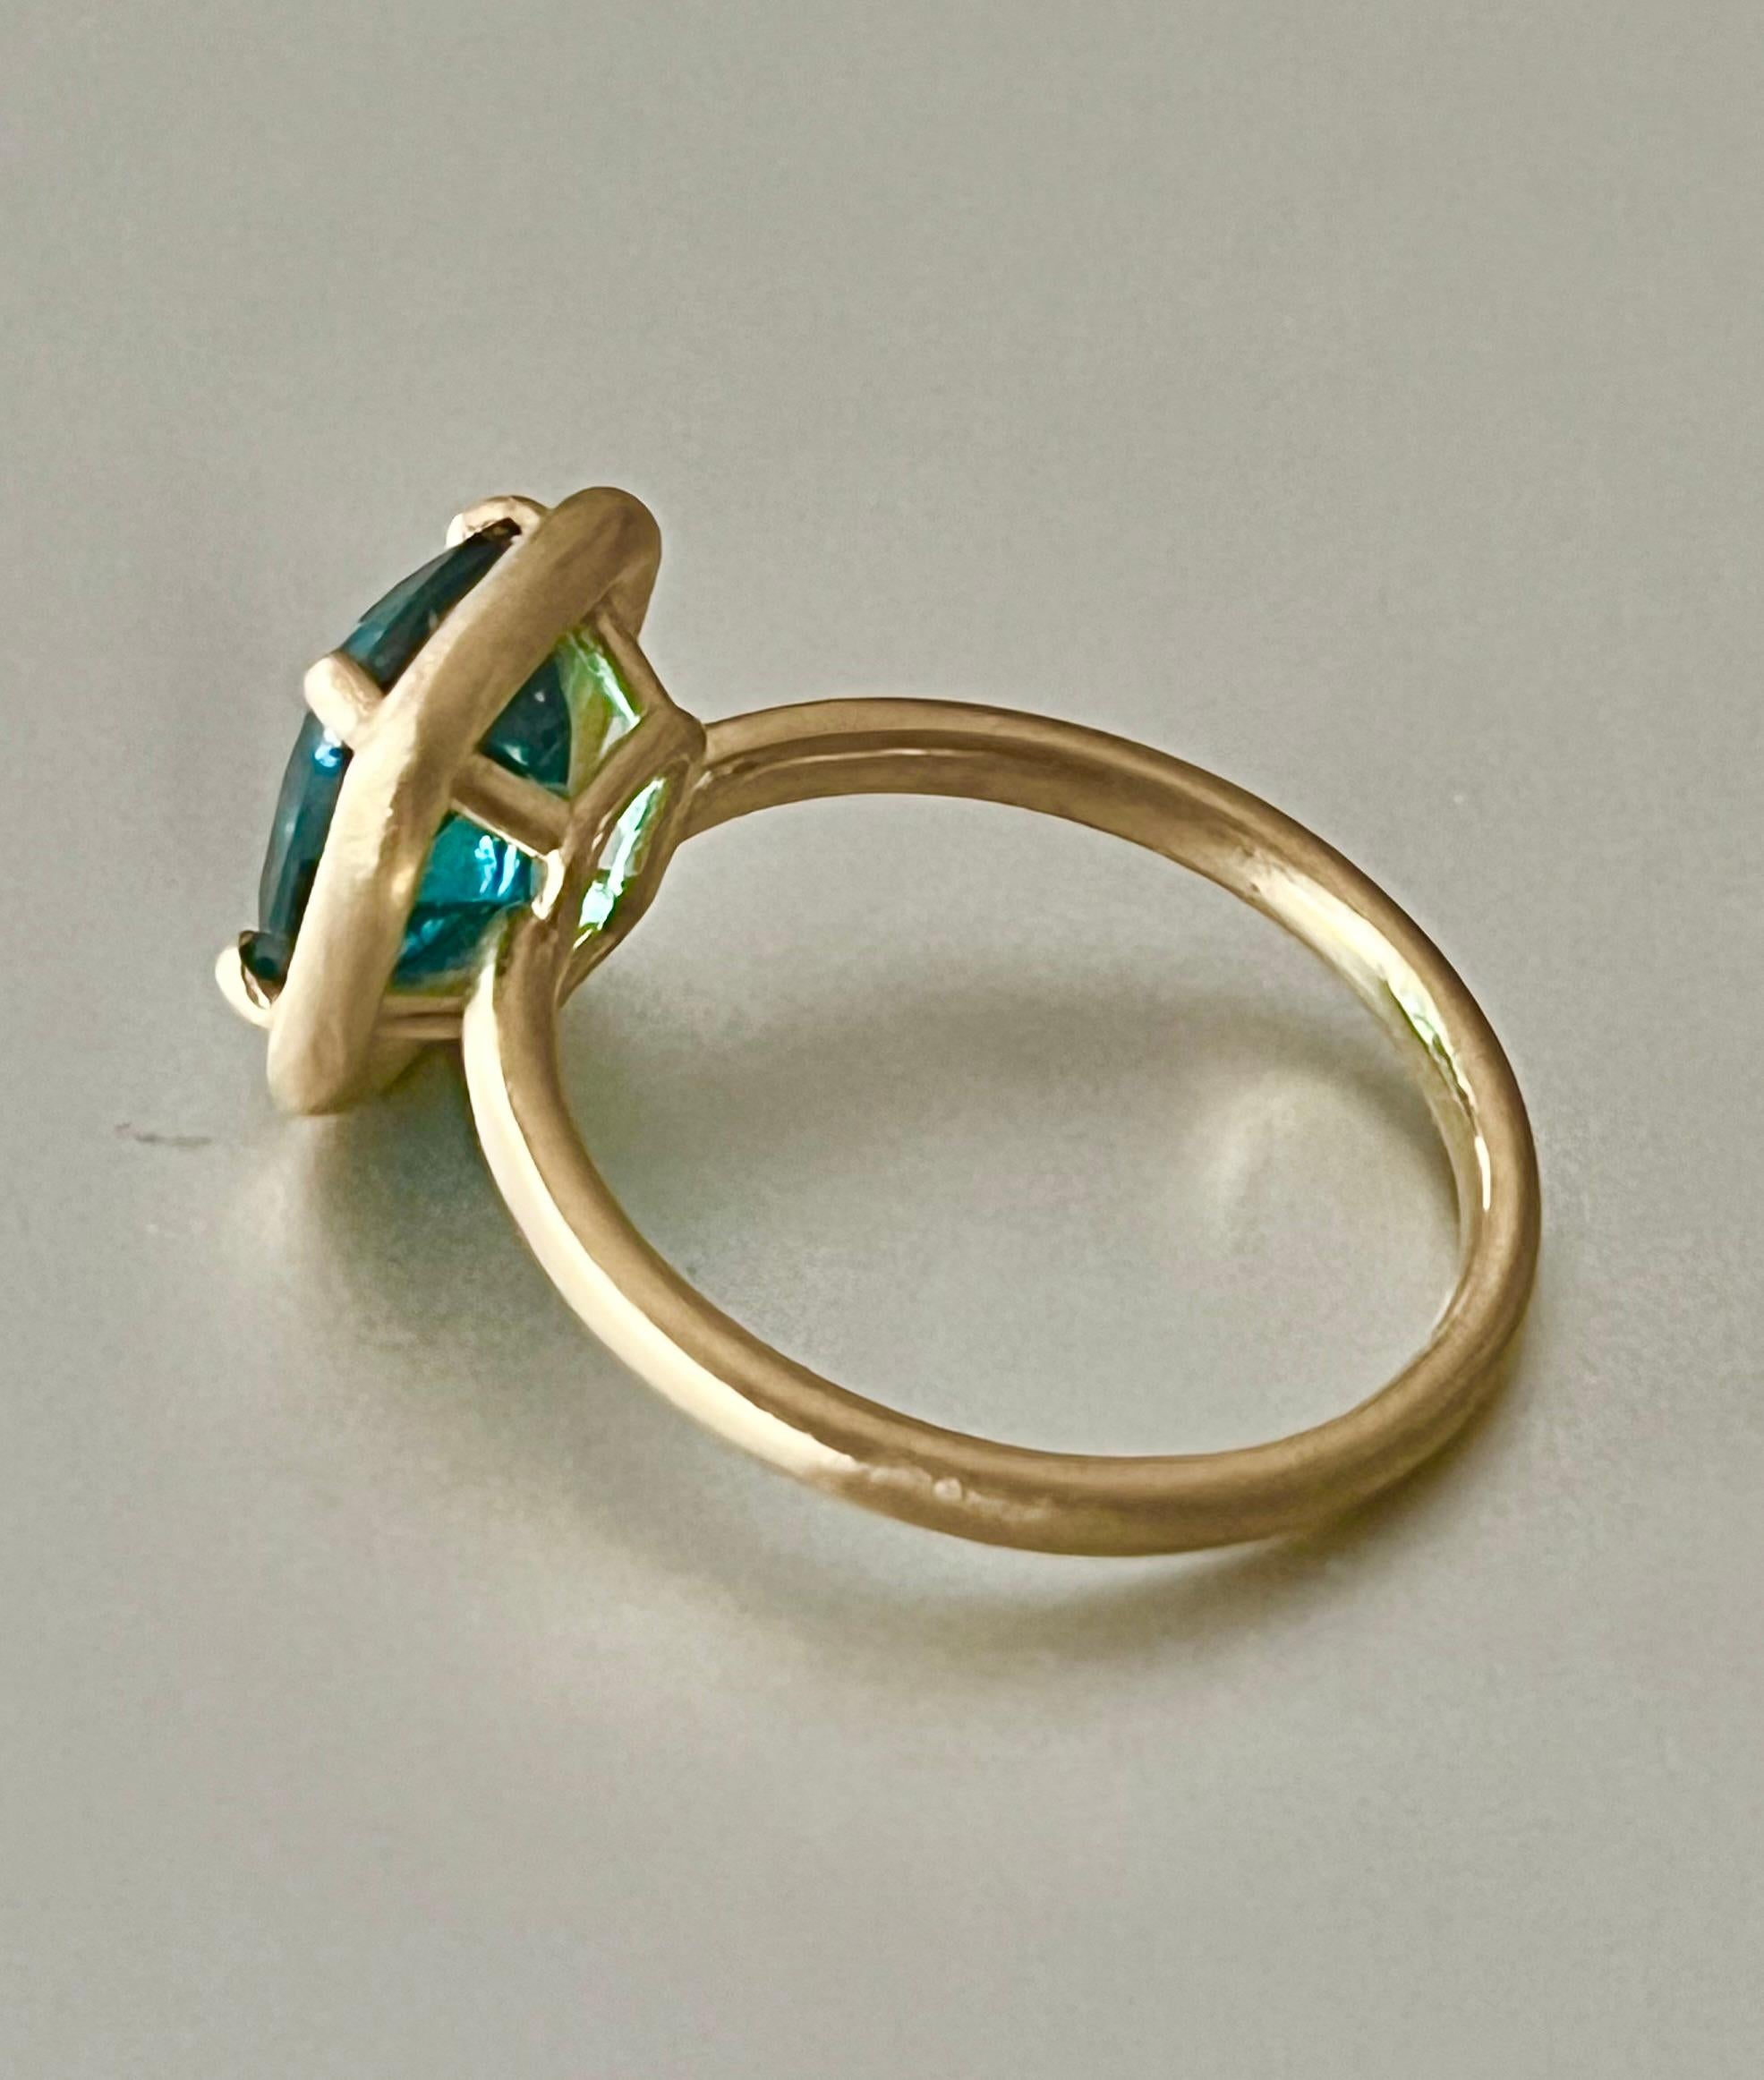 Emerald Cut AAA Indicolite 18K Gold Ring one of a kind, sizable 6 